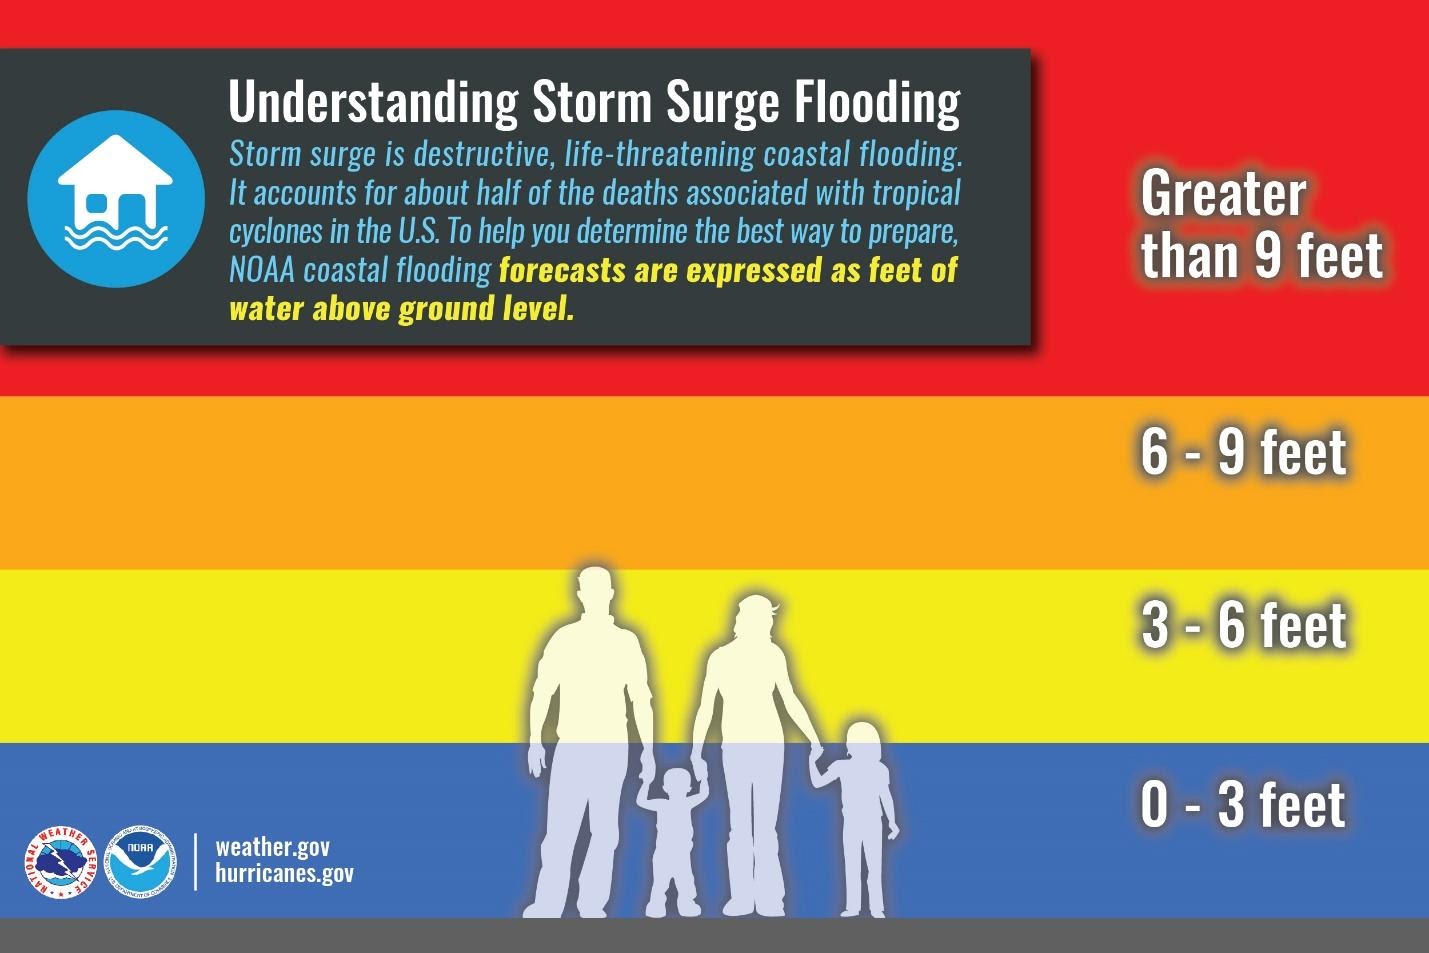 A graphic of the silhouettes of adults and children on top of a scale bar of possible heights of storm surge flooding showing that storm surge can result in flooding much deeper than the height of event the tallest adults. The image reads: Understanding storm surge flooding. Storm surge is destructive, life-threatening coastal flooding. It accounts for about half of the deaths associated with tropical cyclones in the U.S. To help you determine the best way to prepare, NOAA coastal flooding forecasts are exp